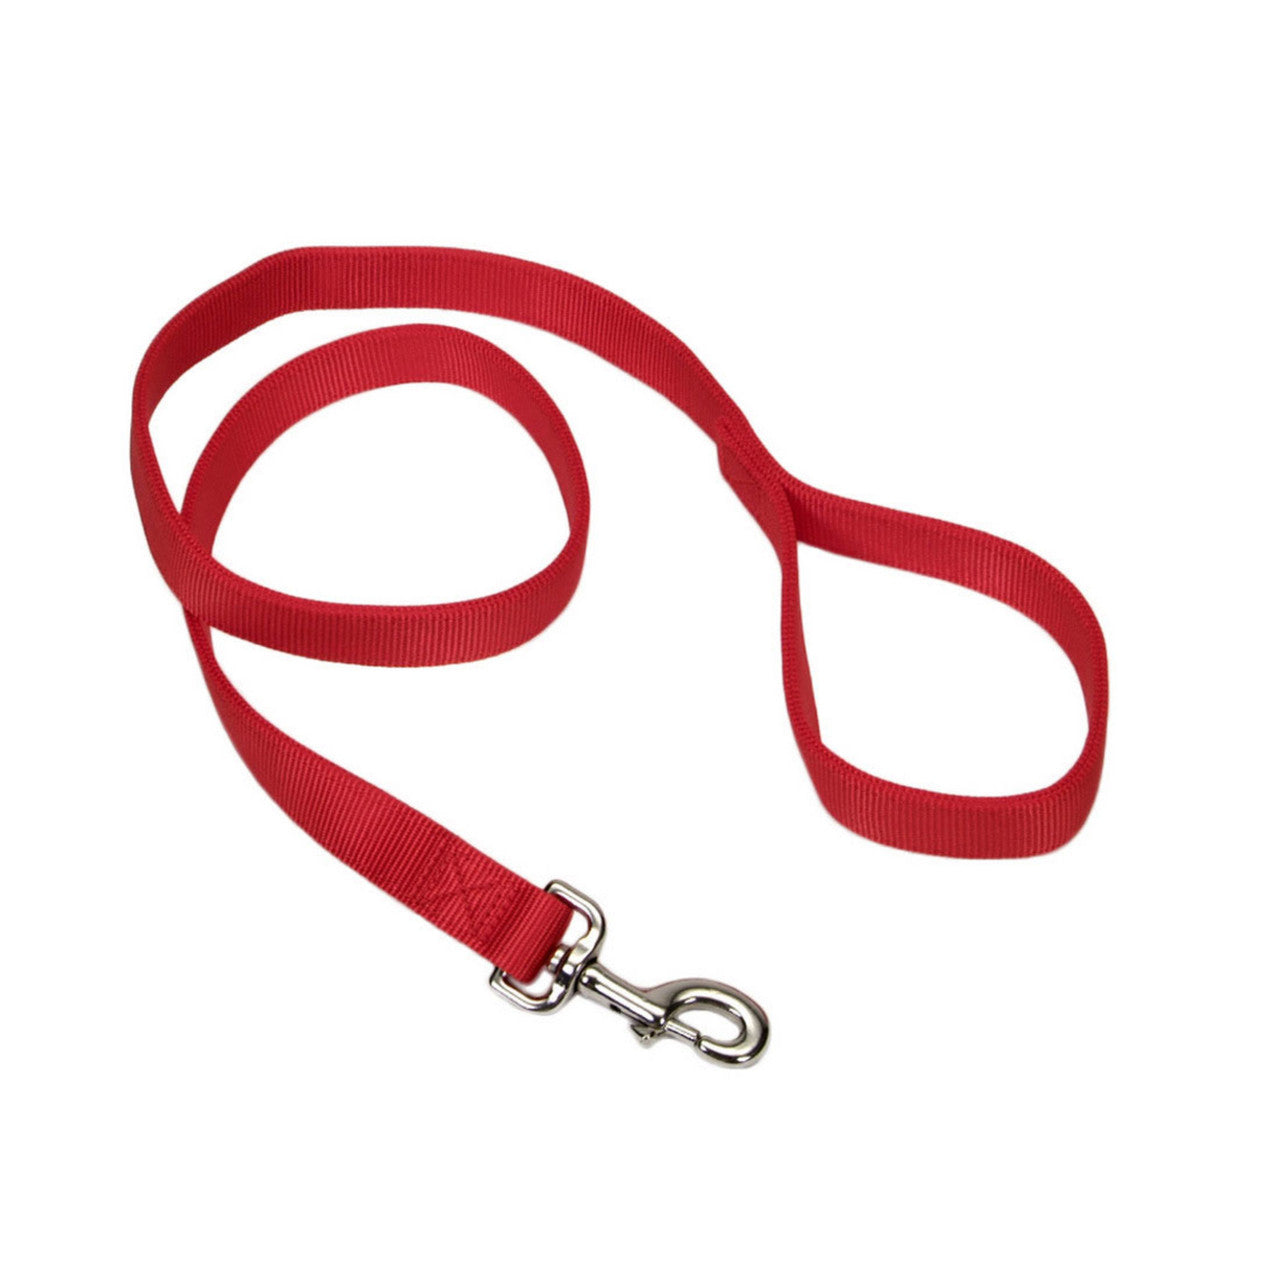 Coastal Double-Ply Nylon Dog Leash Red 1 in x 4 ft